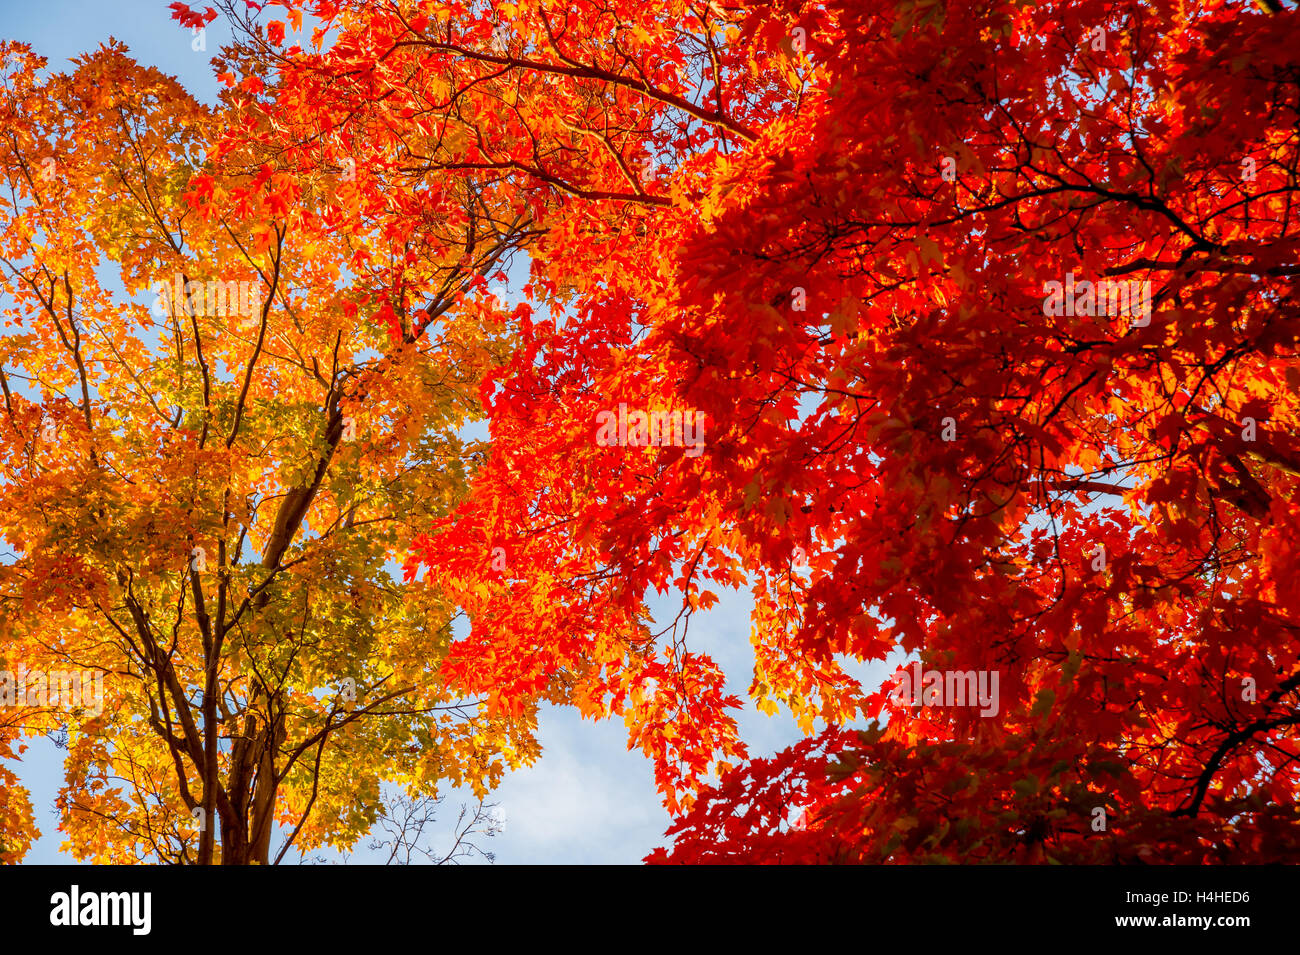 Fall colors: autumn foliage of maple trees in Quebec, Canada Stock Photo